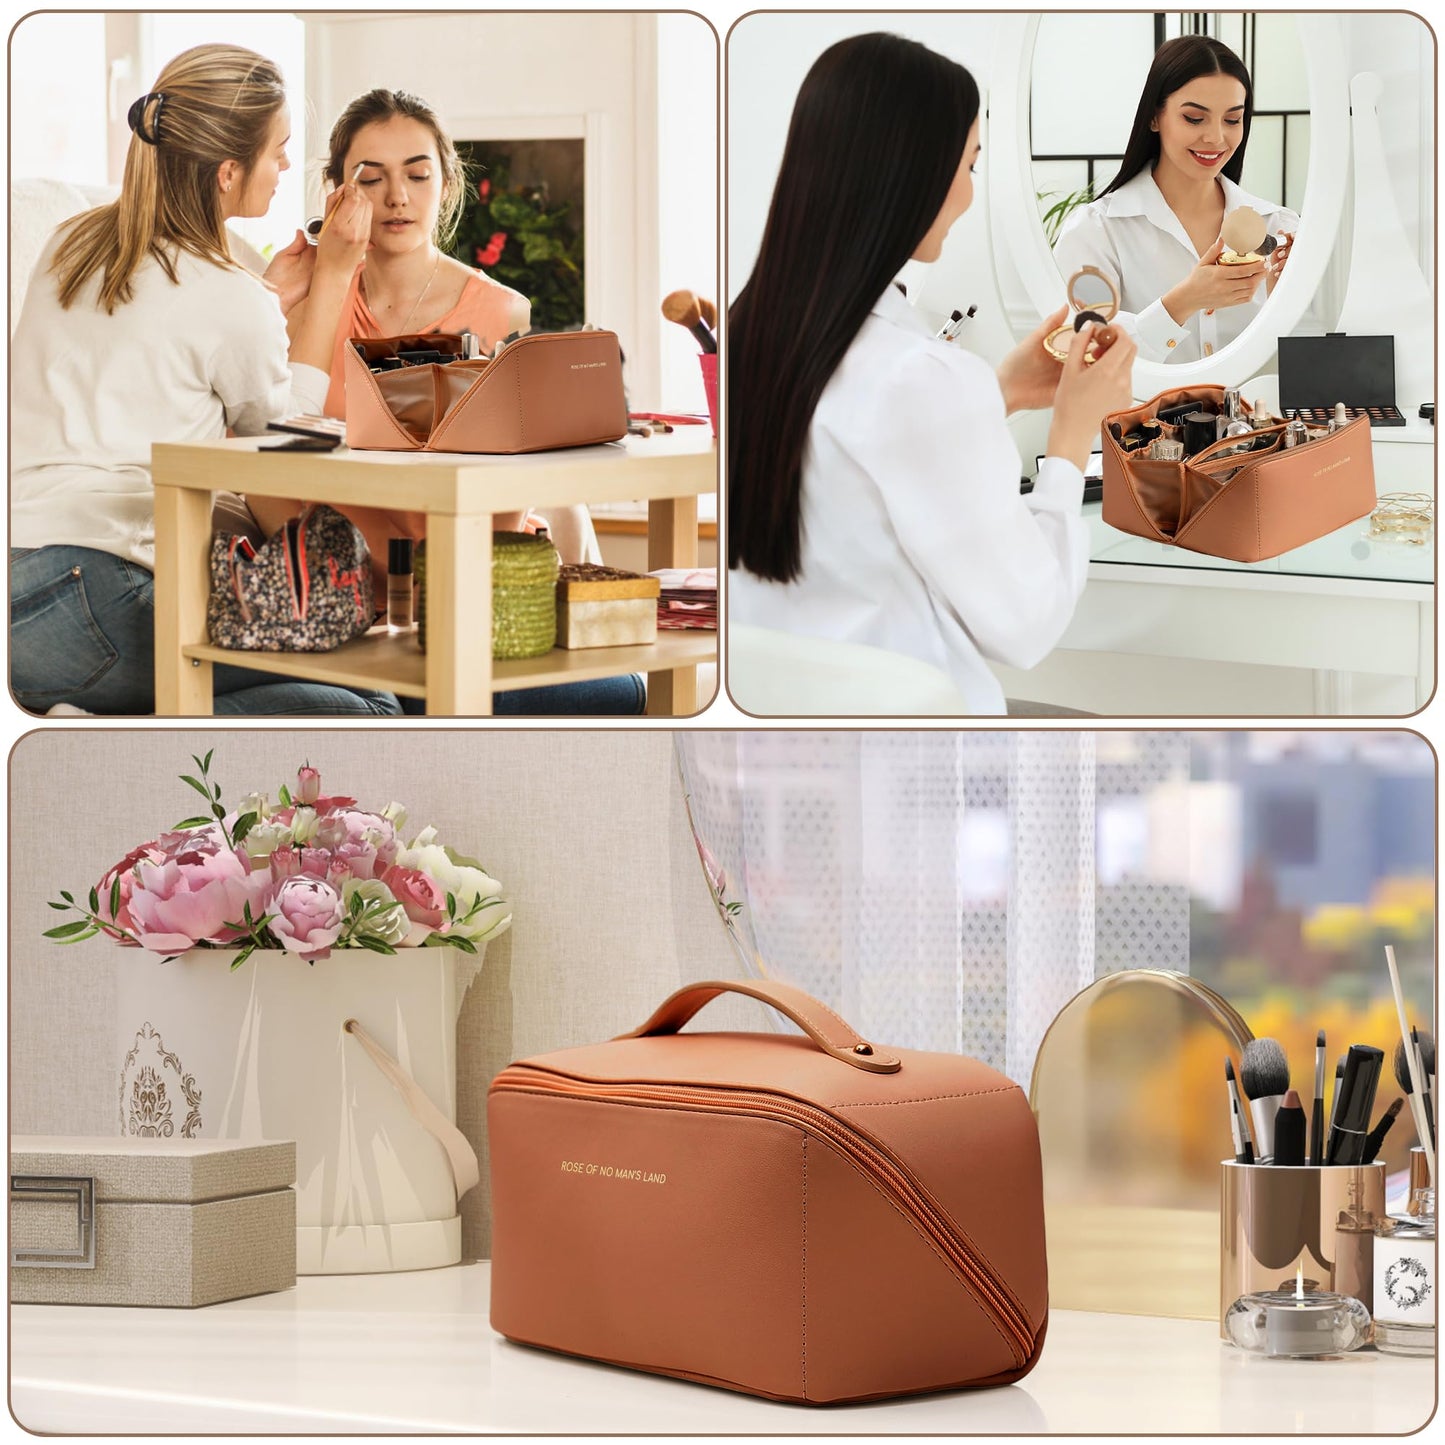 TUYSKE Travel Makeup Bag Large Capacity Cosmetic Bags Waterproof Toiletry Bag for Women Lay Flat PU Leather Makeup Bag with Divider and Handle Makeup Organizer Bag Cosmetic Pouch Brown